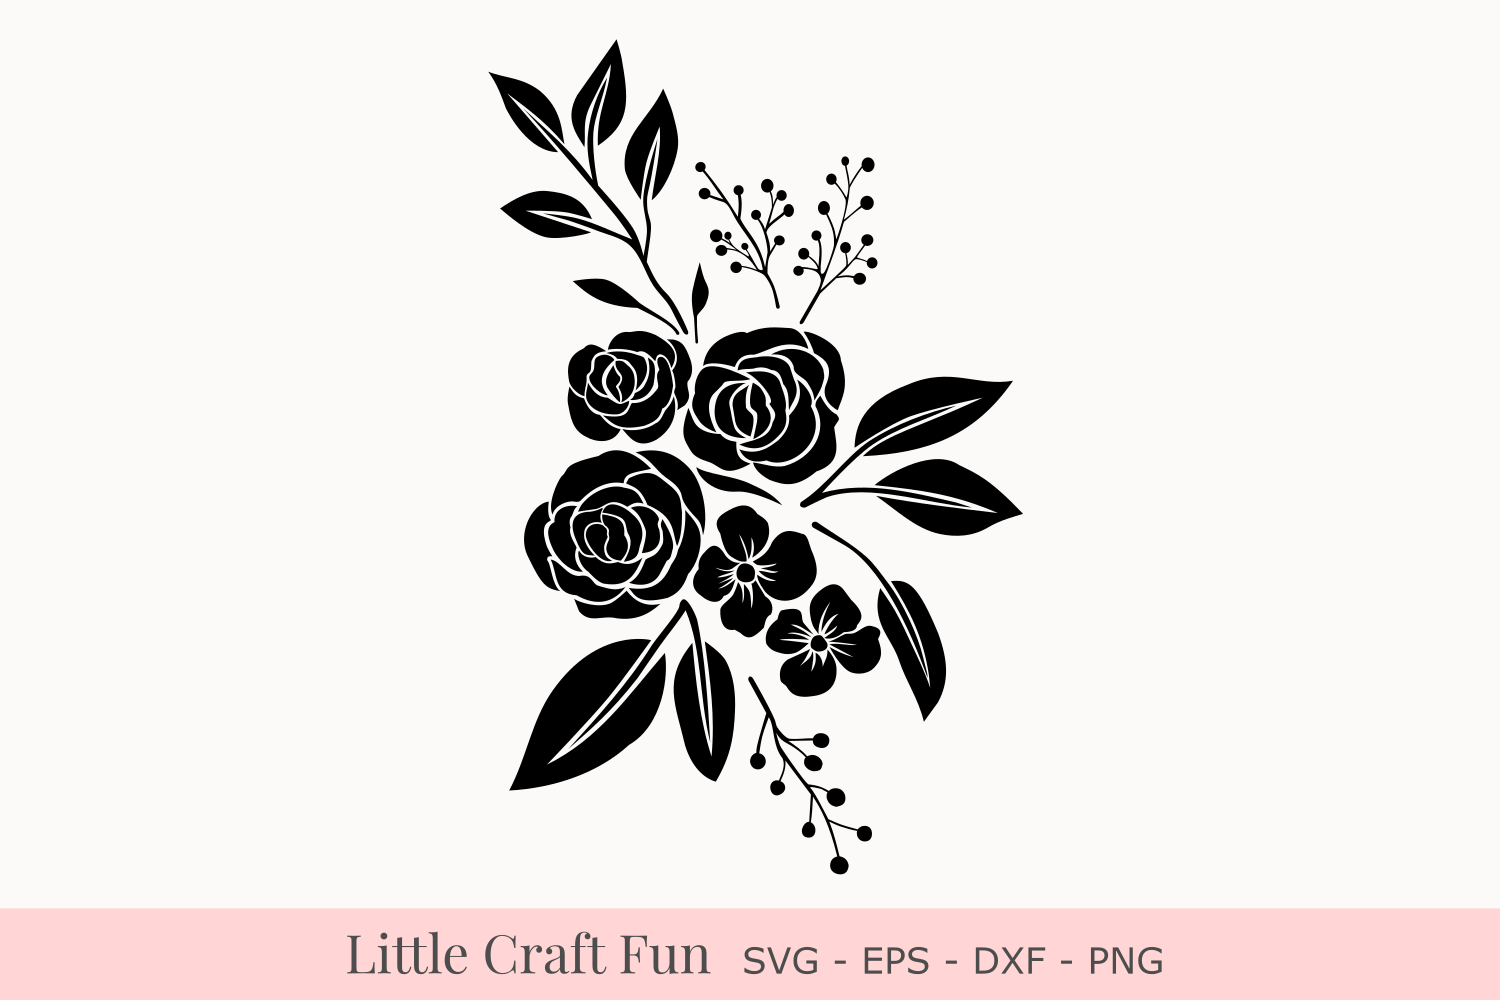 Rose Flowers Silhouette Svg, Rose Florals Silhouette Svg ...